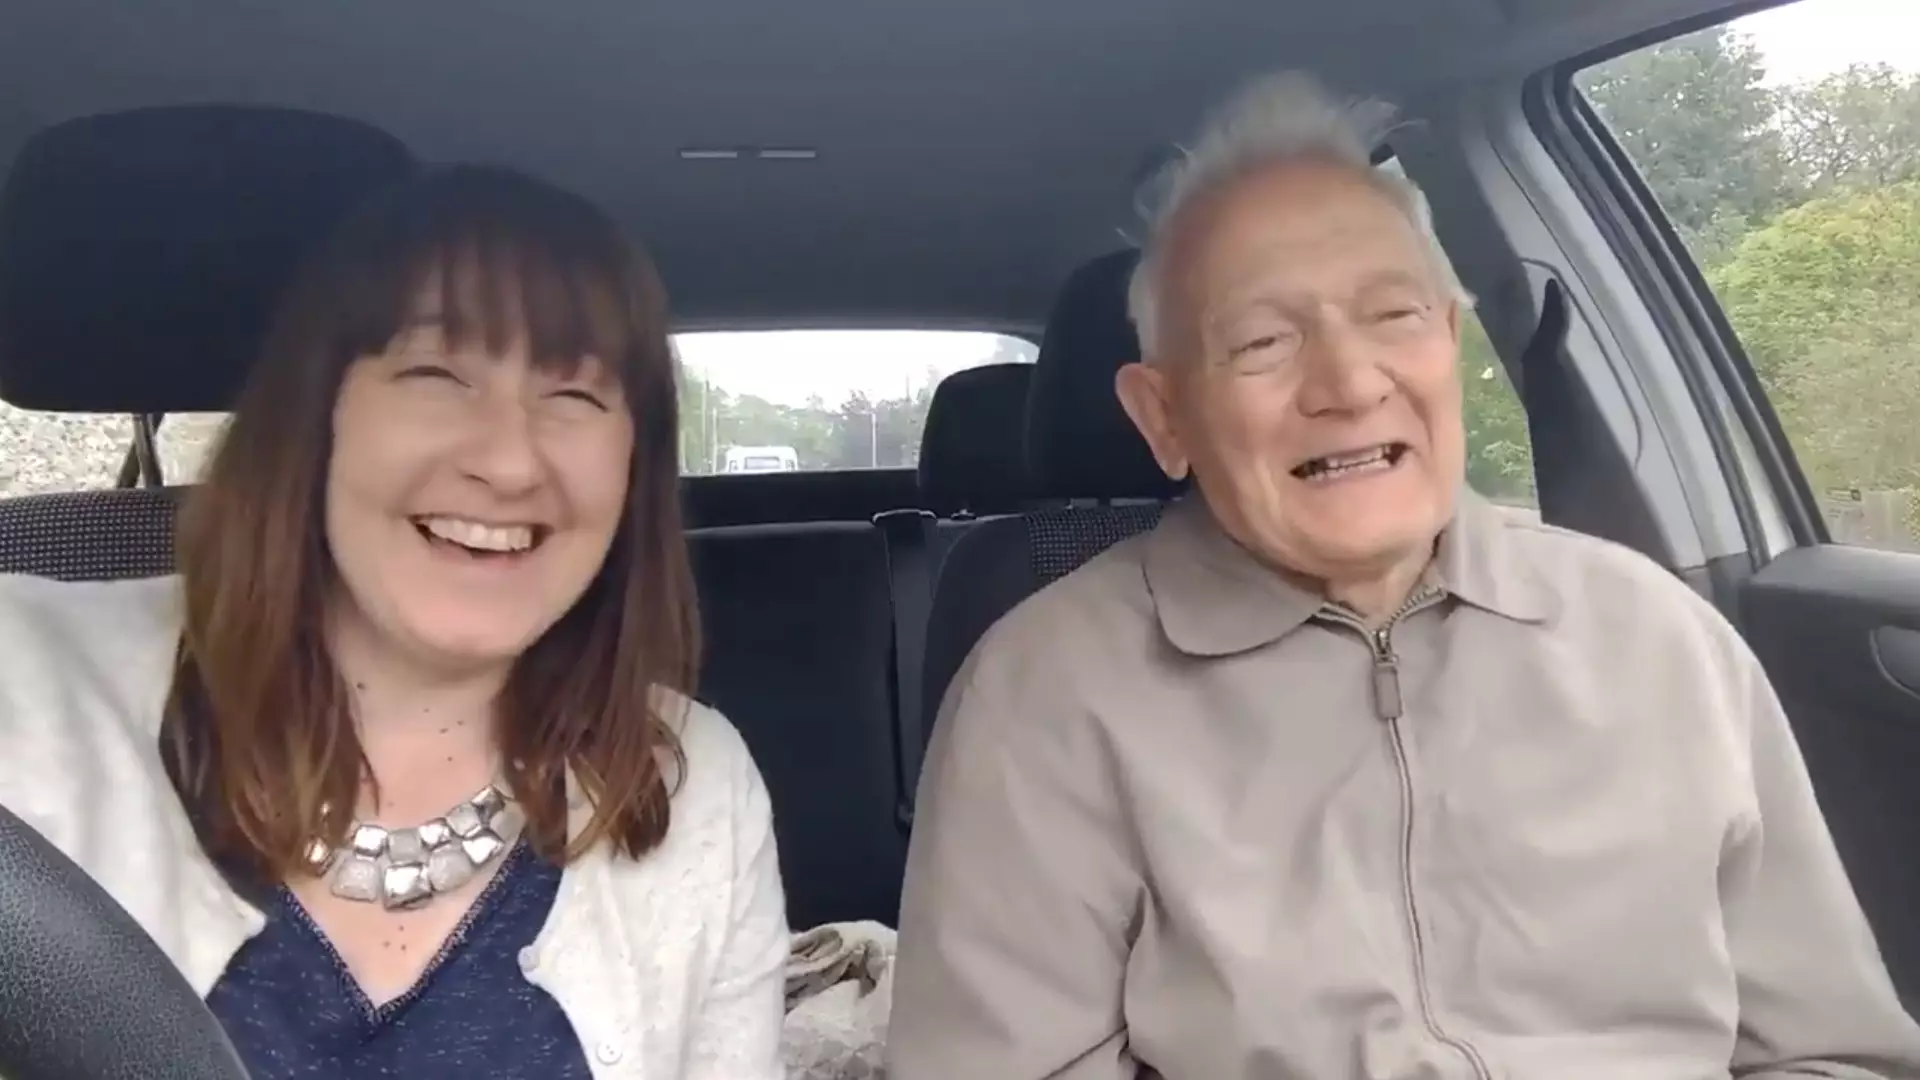 Heartwarming Video Shows Dementia Patient Singing On The Way To Music Therapy 